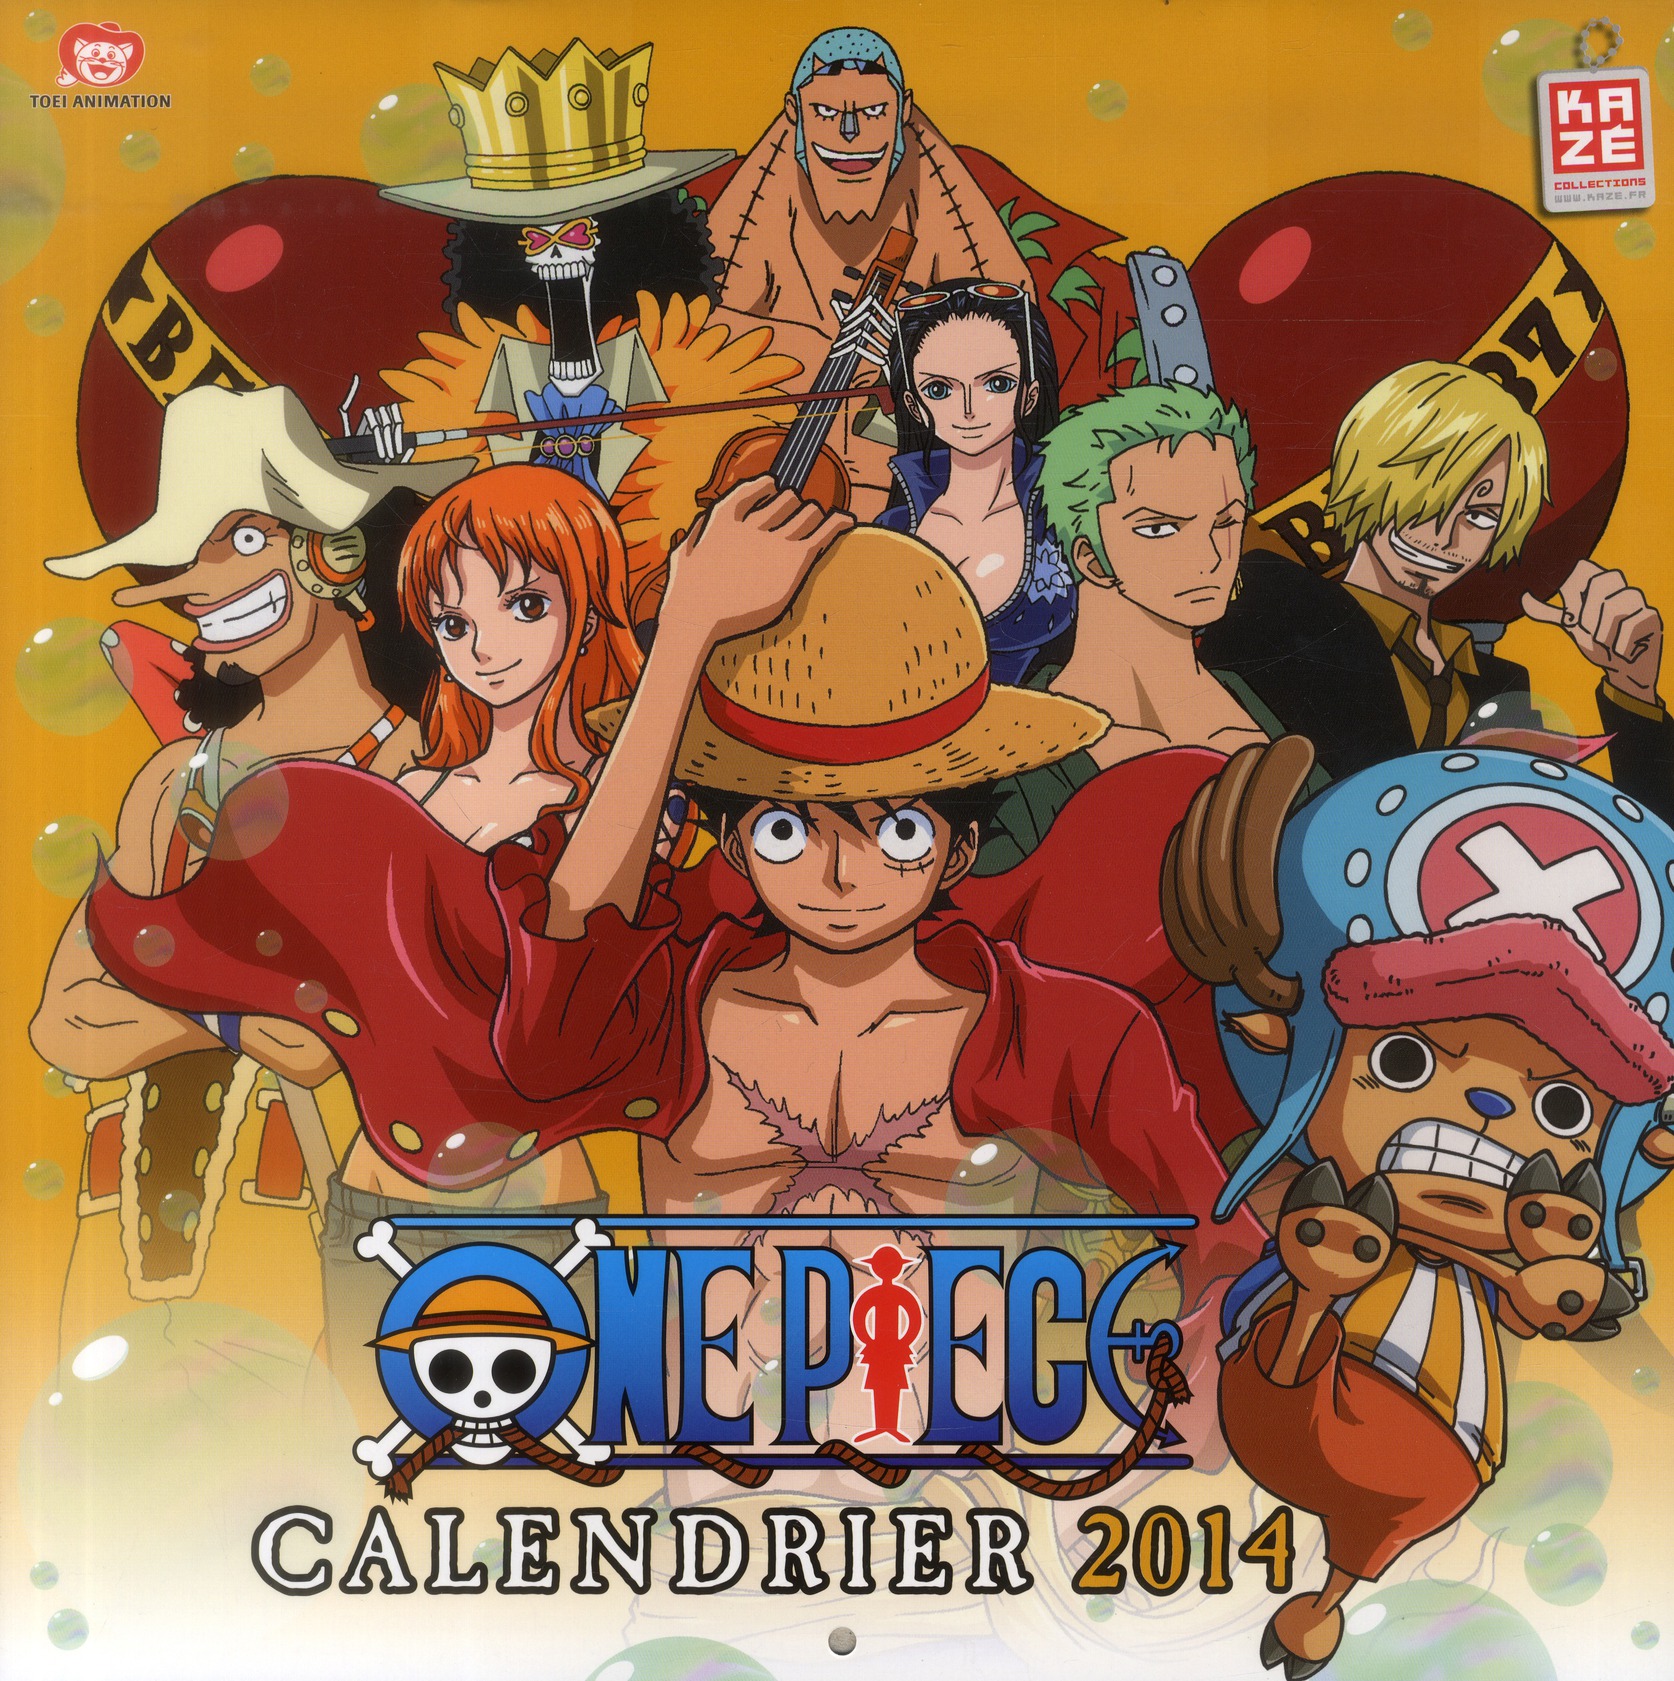 CALENDRIER 2014 ONE PIECE